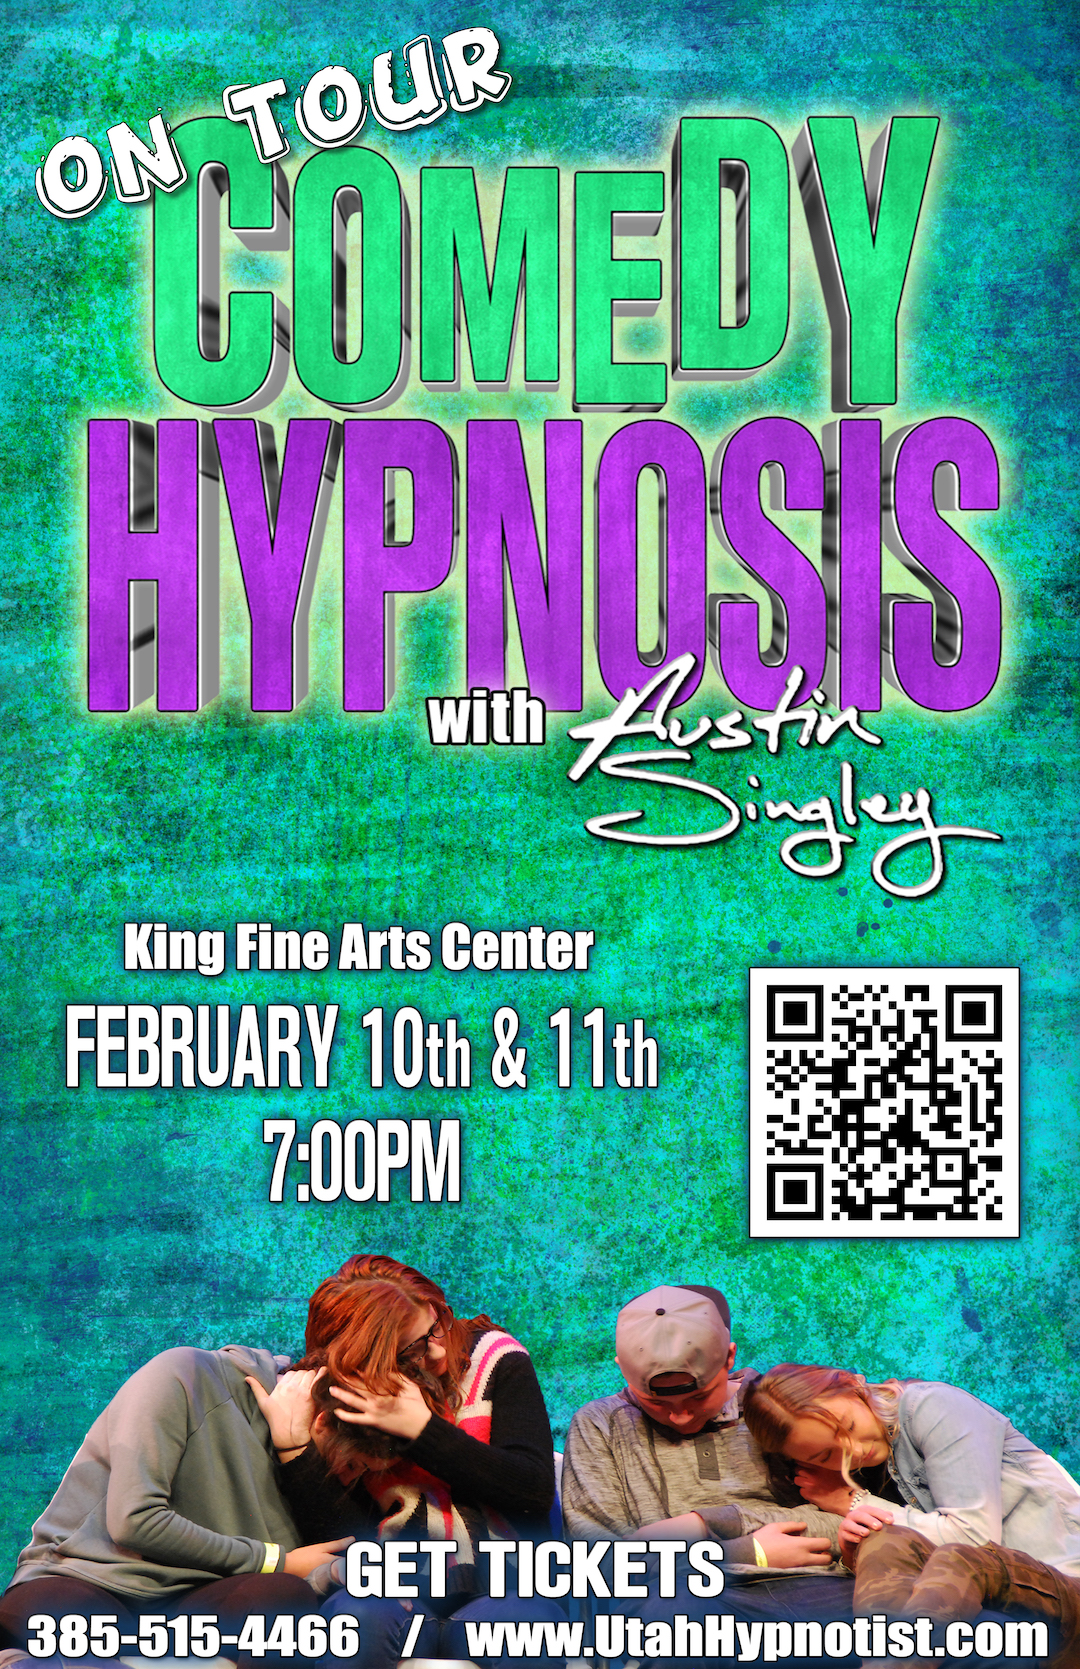 Comedy Hypnosis with Austin Singley King Fine Arts Center February 10th and 11th at 7:00pm